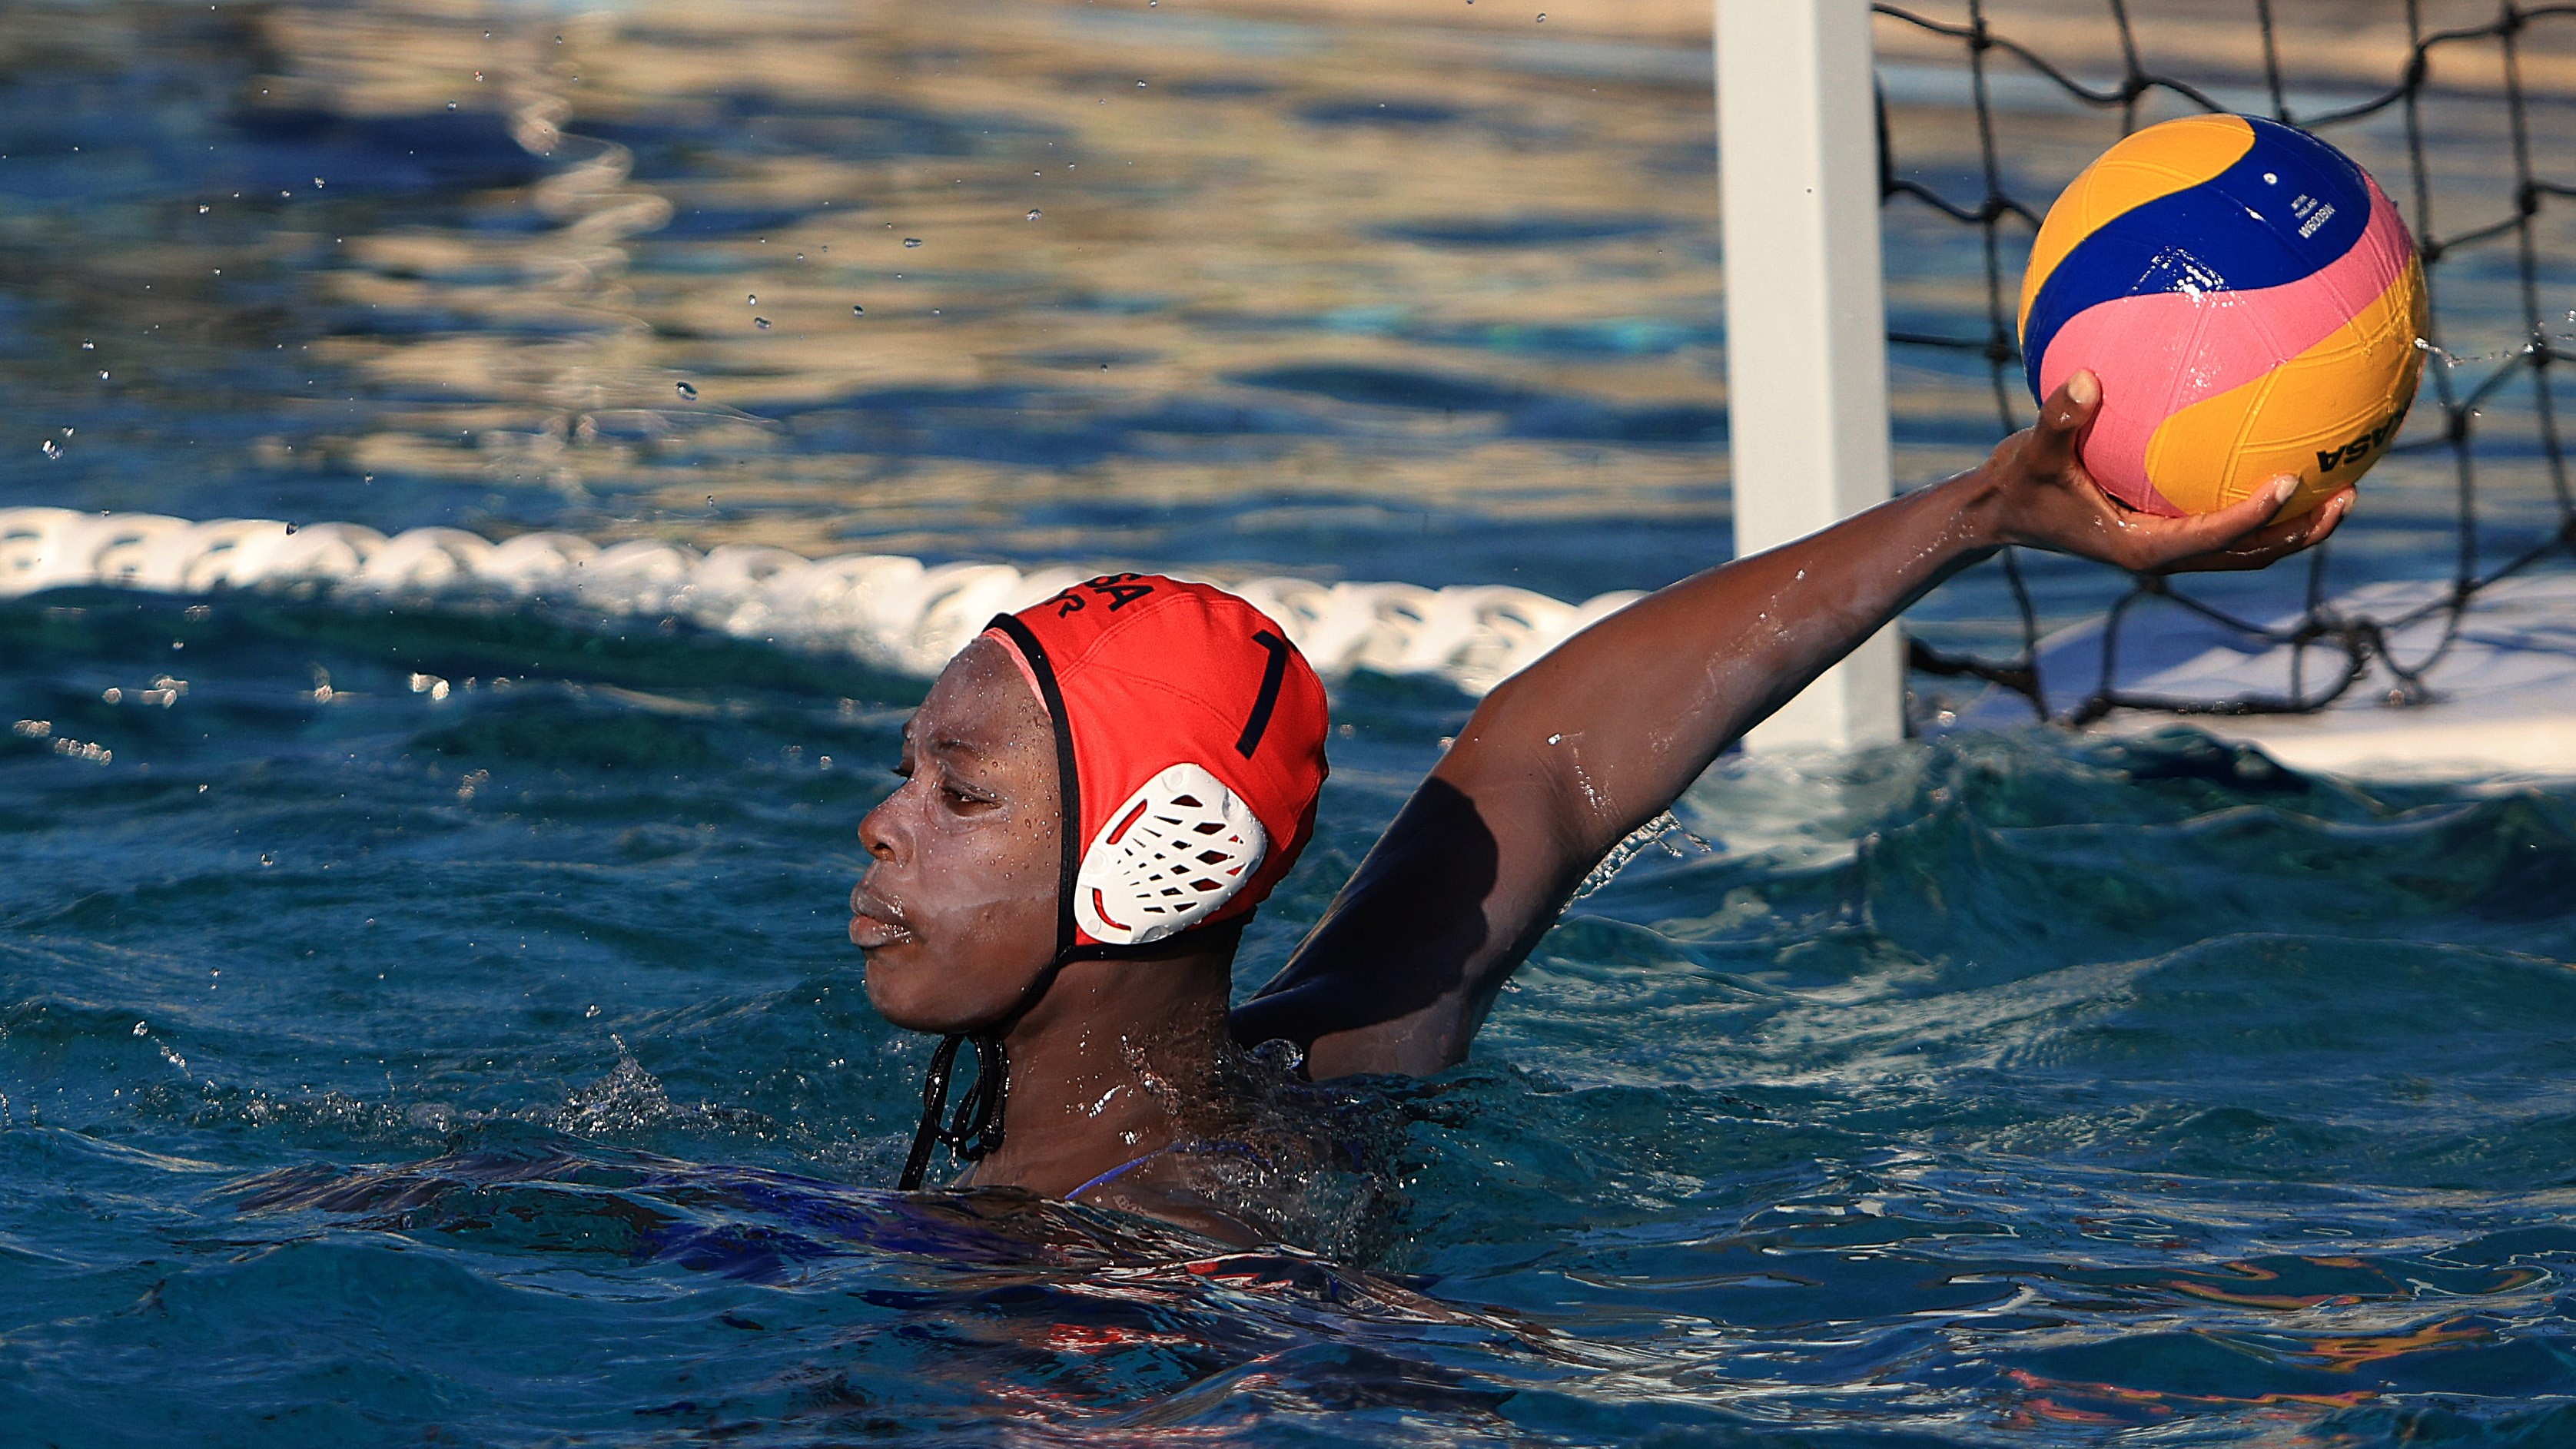 Team USA's Ashleigh Johnson is rated as the best goalkeeper in the world